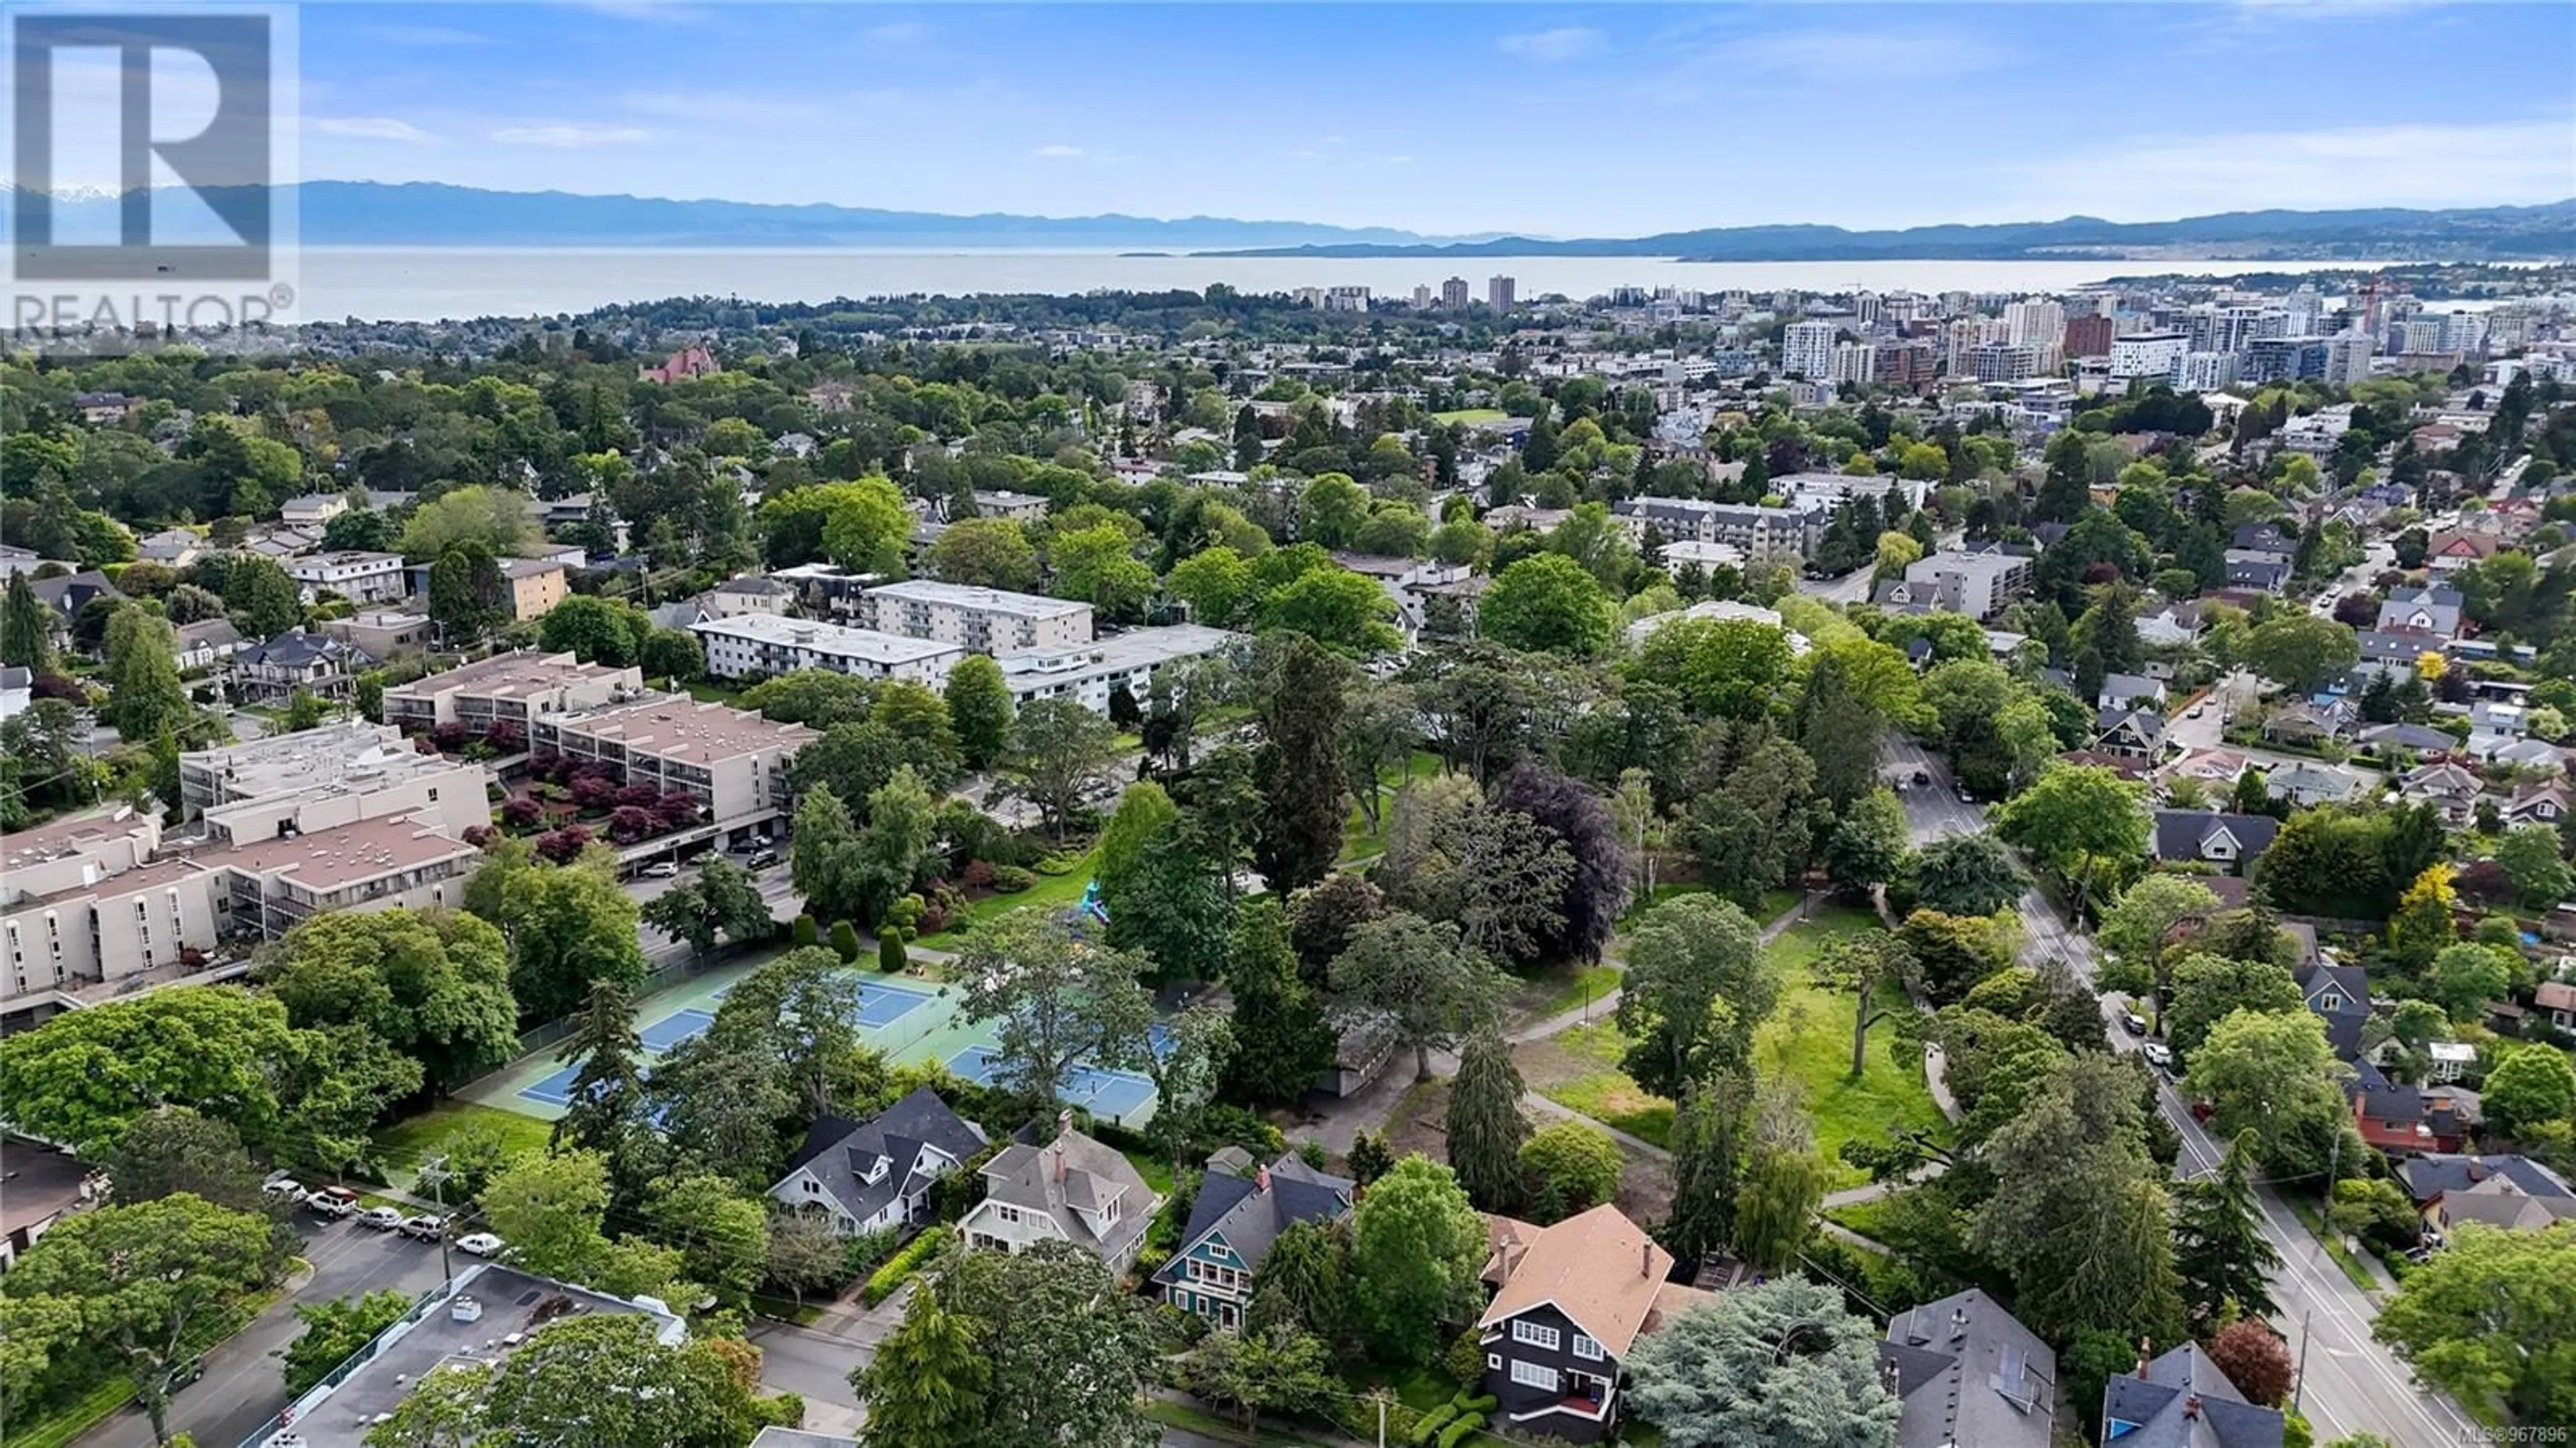 Lakeview for 1610 Belmont Ave, Victoria British Columbia V8R3Y7